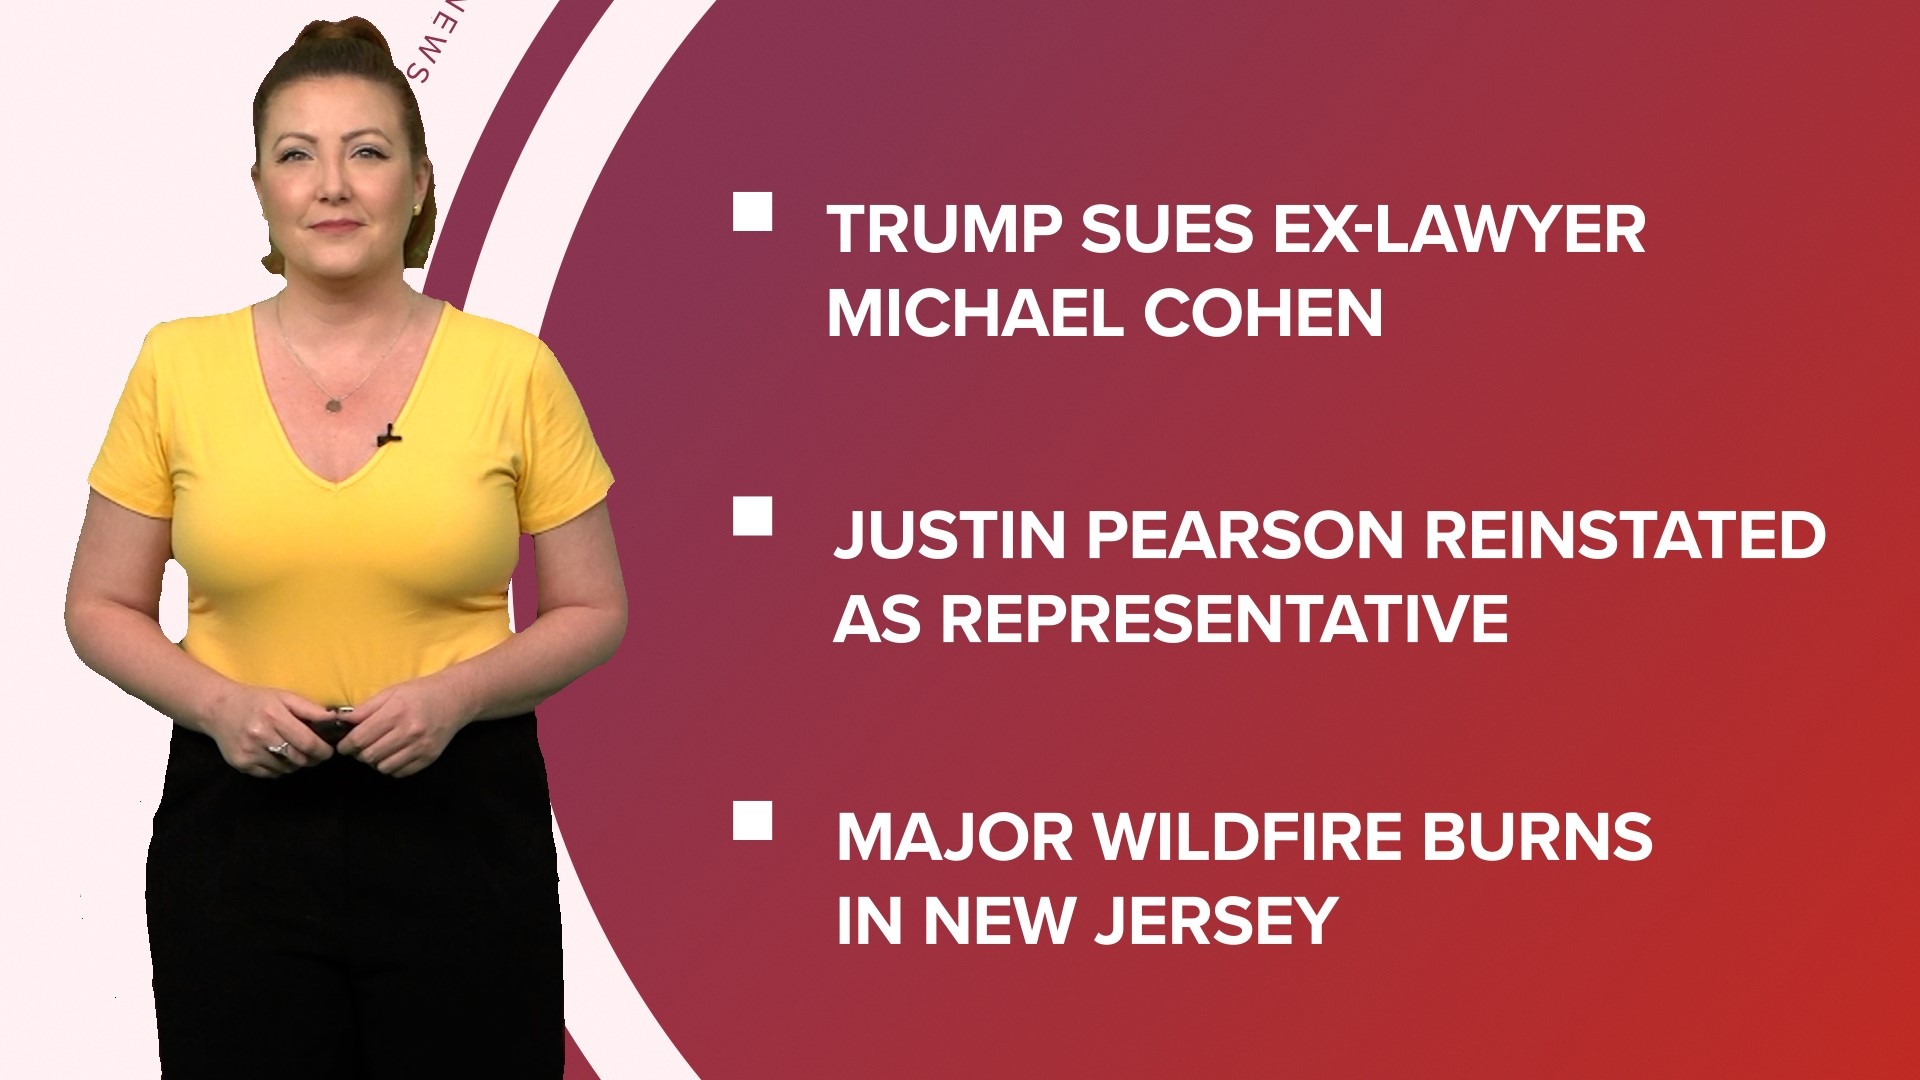 A look at what is happening in the news from another TN lawmaker reinstated as state representative to Trump suing his ex-lawyer Michael Cohen.